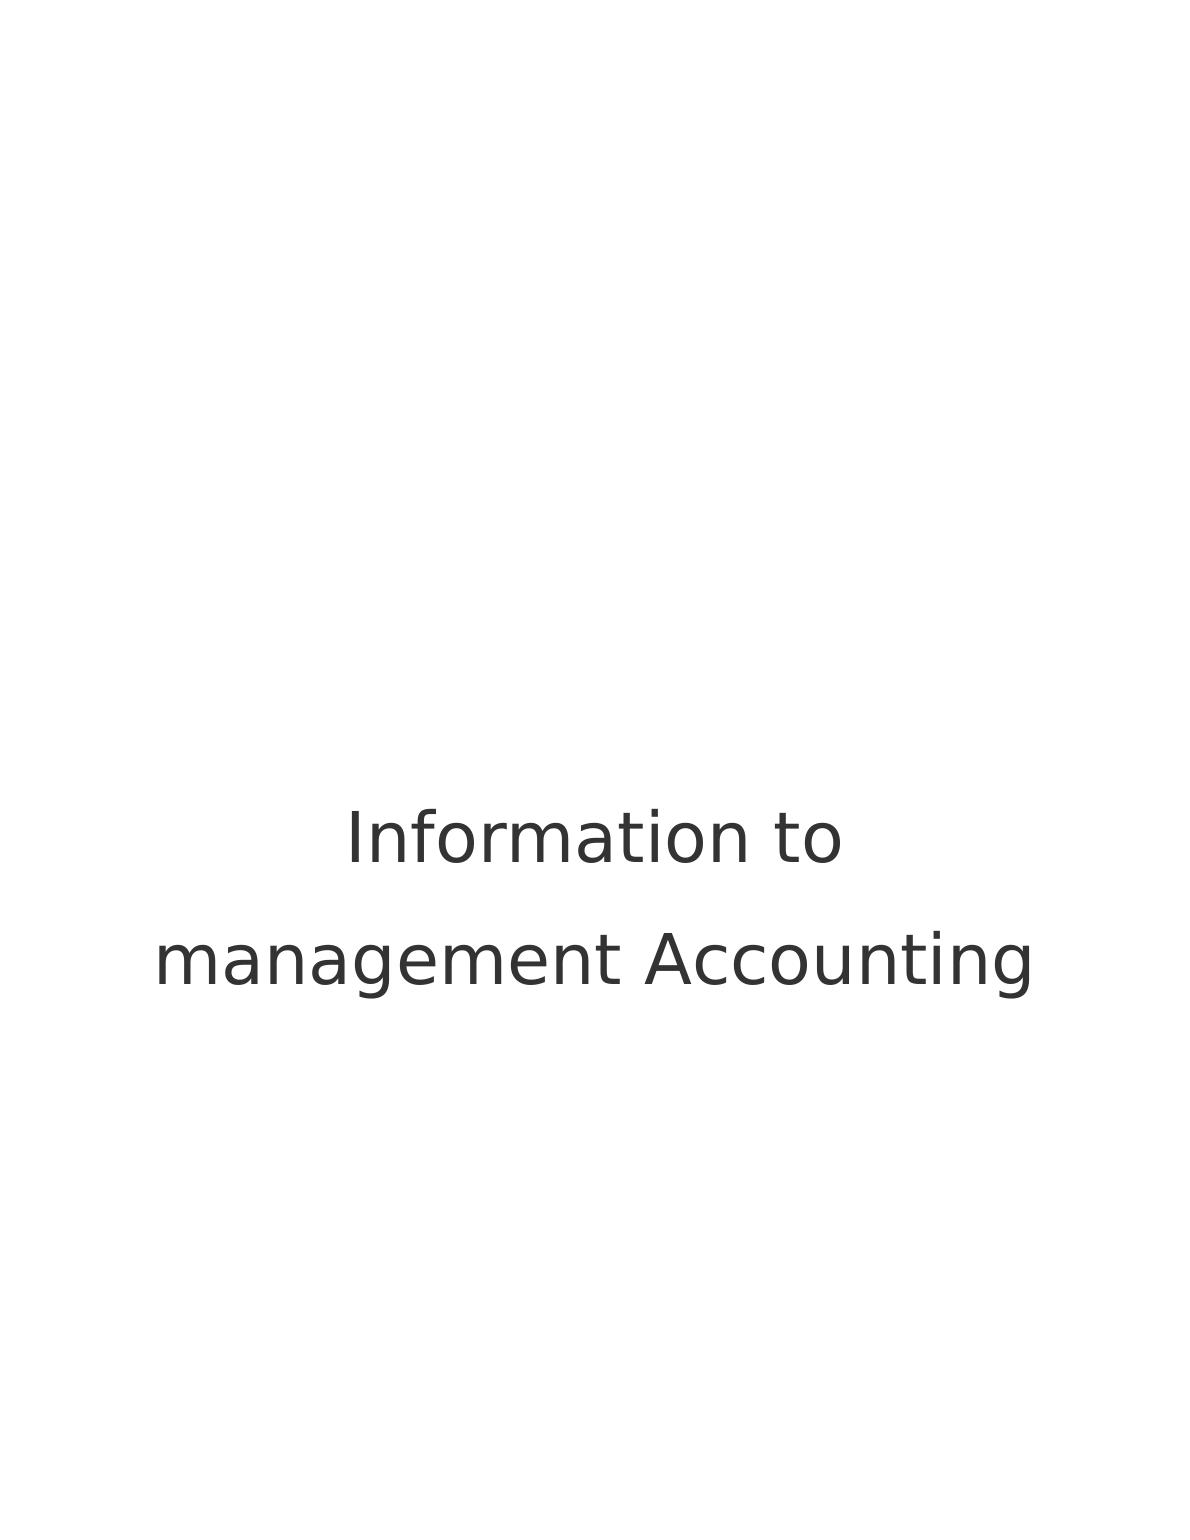 Assignment of Management Accounting (MA)_1